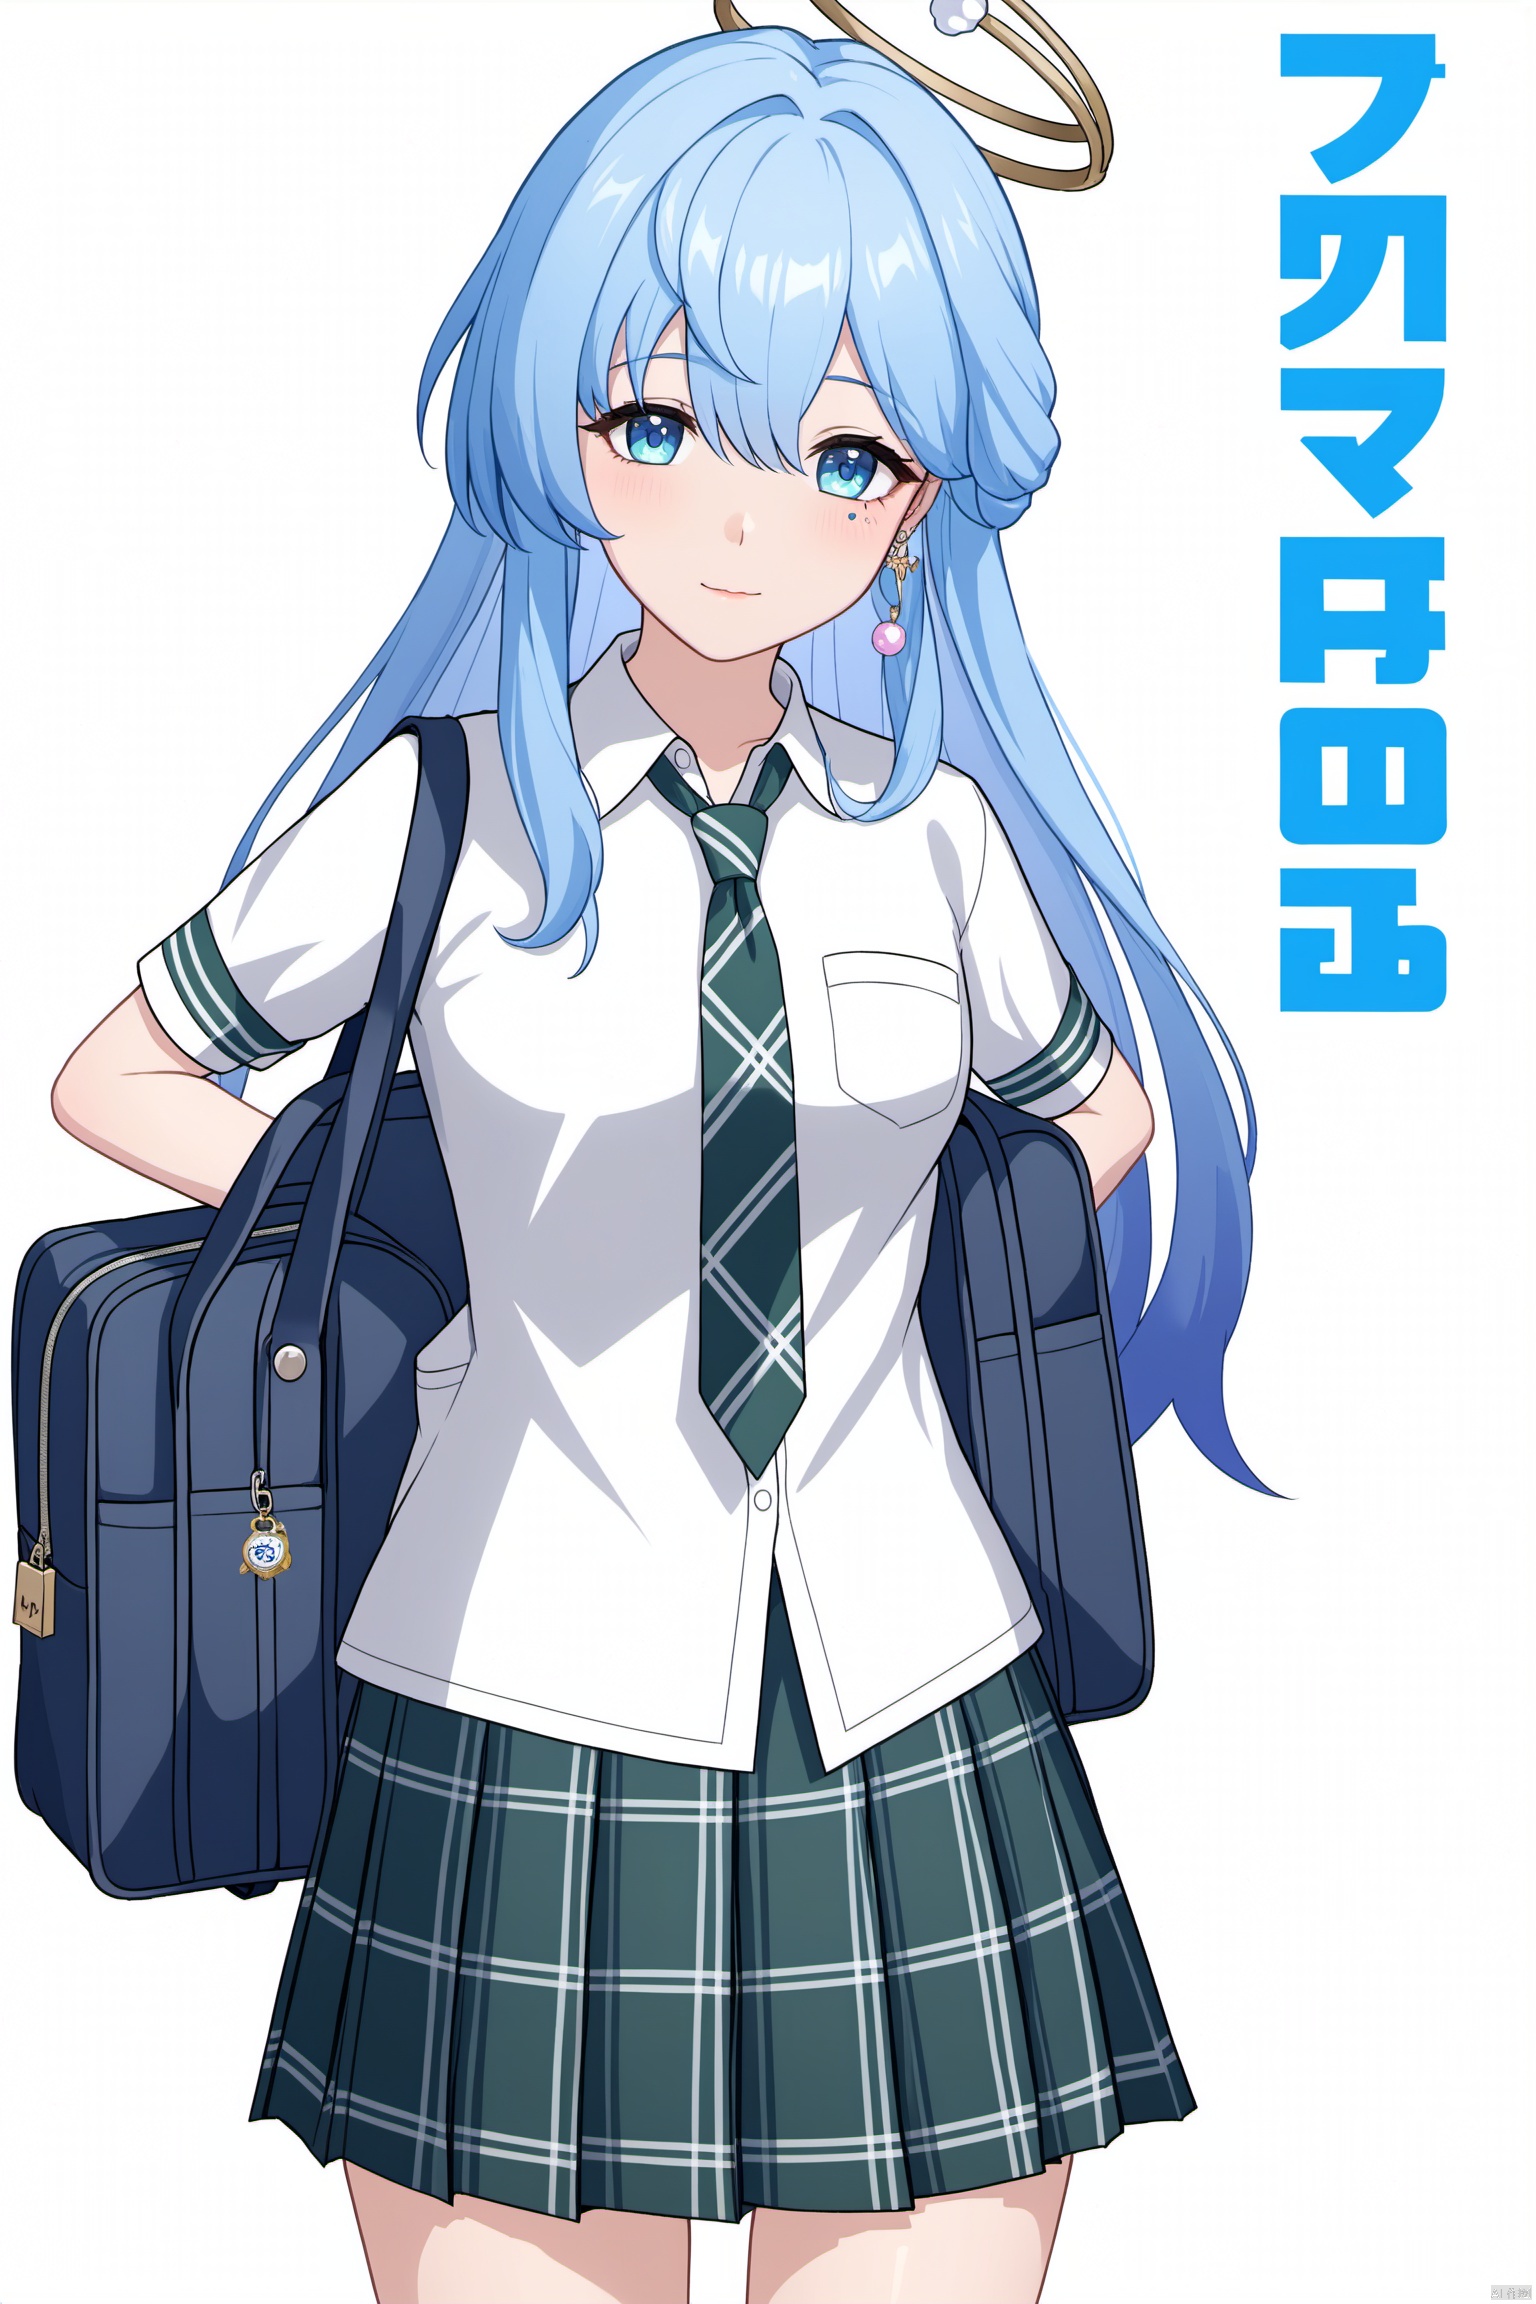  nai3,masterpiece, best quality,1girl, alternate costume, solo, bag, looking at viewer, blush, plaid, charm (object), bag charm, bangs, contemporary, sidelocks, jewelry, character name, female woman, white background, \\\\\\\\\ nai3, masterpiece, best quality,1girl, school uniform, alternate costume, solo, skirt, bag, necktie, multicolored hair, looking at viewer, blush, plaid skirt, school bag, plaid, charm (object), bag charm, sidelocks, jewelry, pleated skirt, green skirt, white shirt, green necktie, collared shirt, character name, female child, white background,school_uniform,school_girl,school_uniforms, \\\\\\\\\\\, zgn,1girl,long hair,halo,blue eyes,gloves,bangs,blue hair,white dress